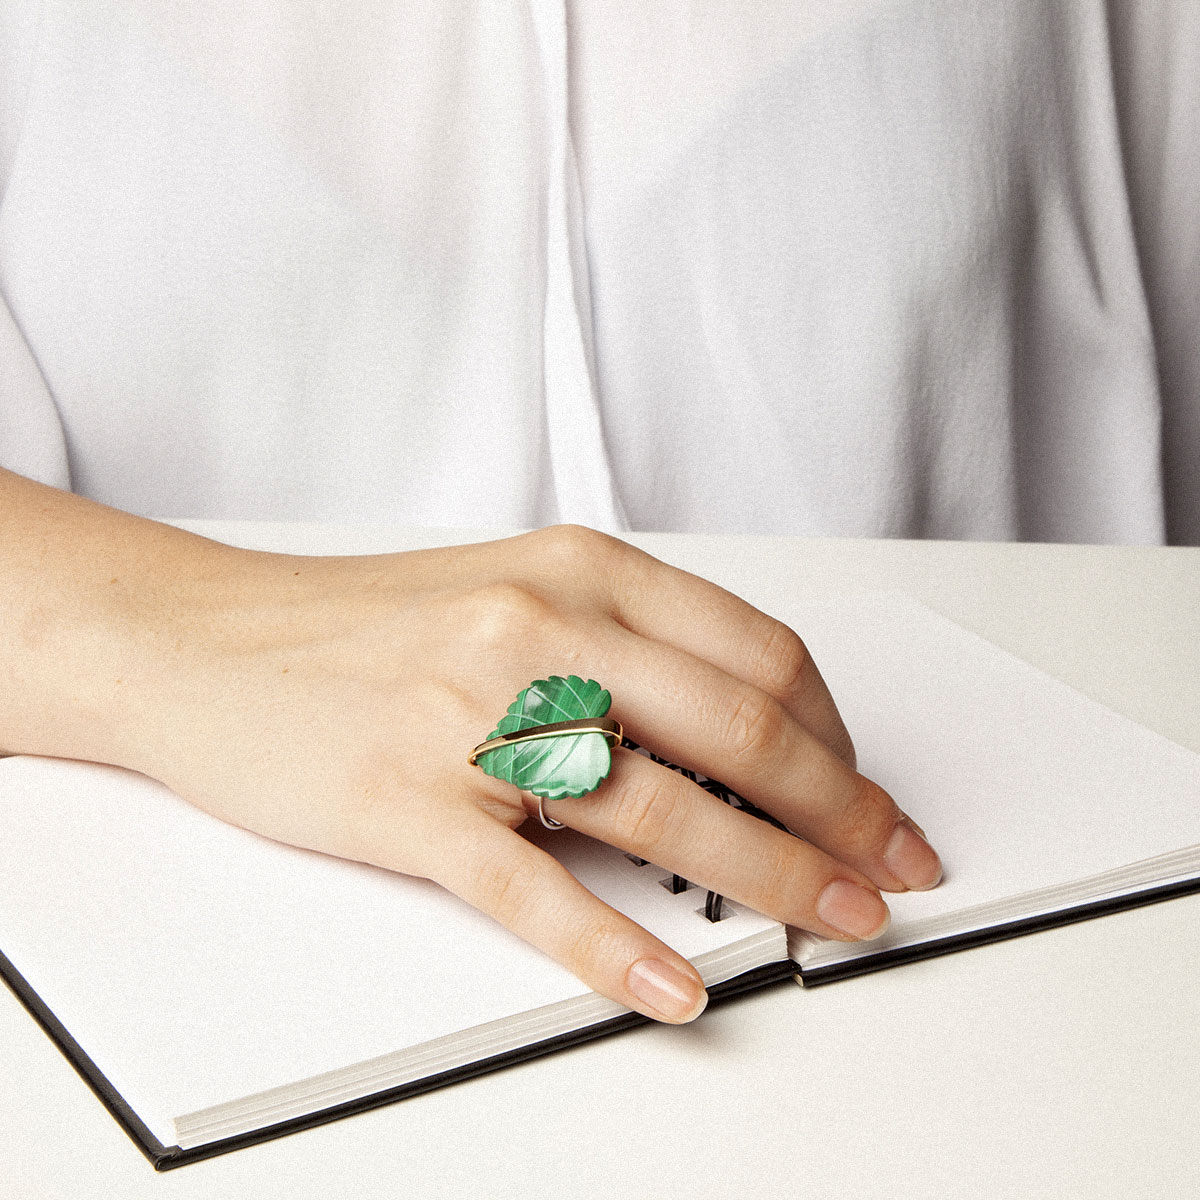 Gaia handcrafted ring in 9k or 18k gold, sterling silver and malachite designed by Belen Bajo m1